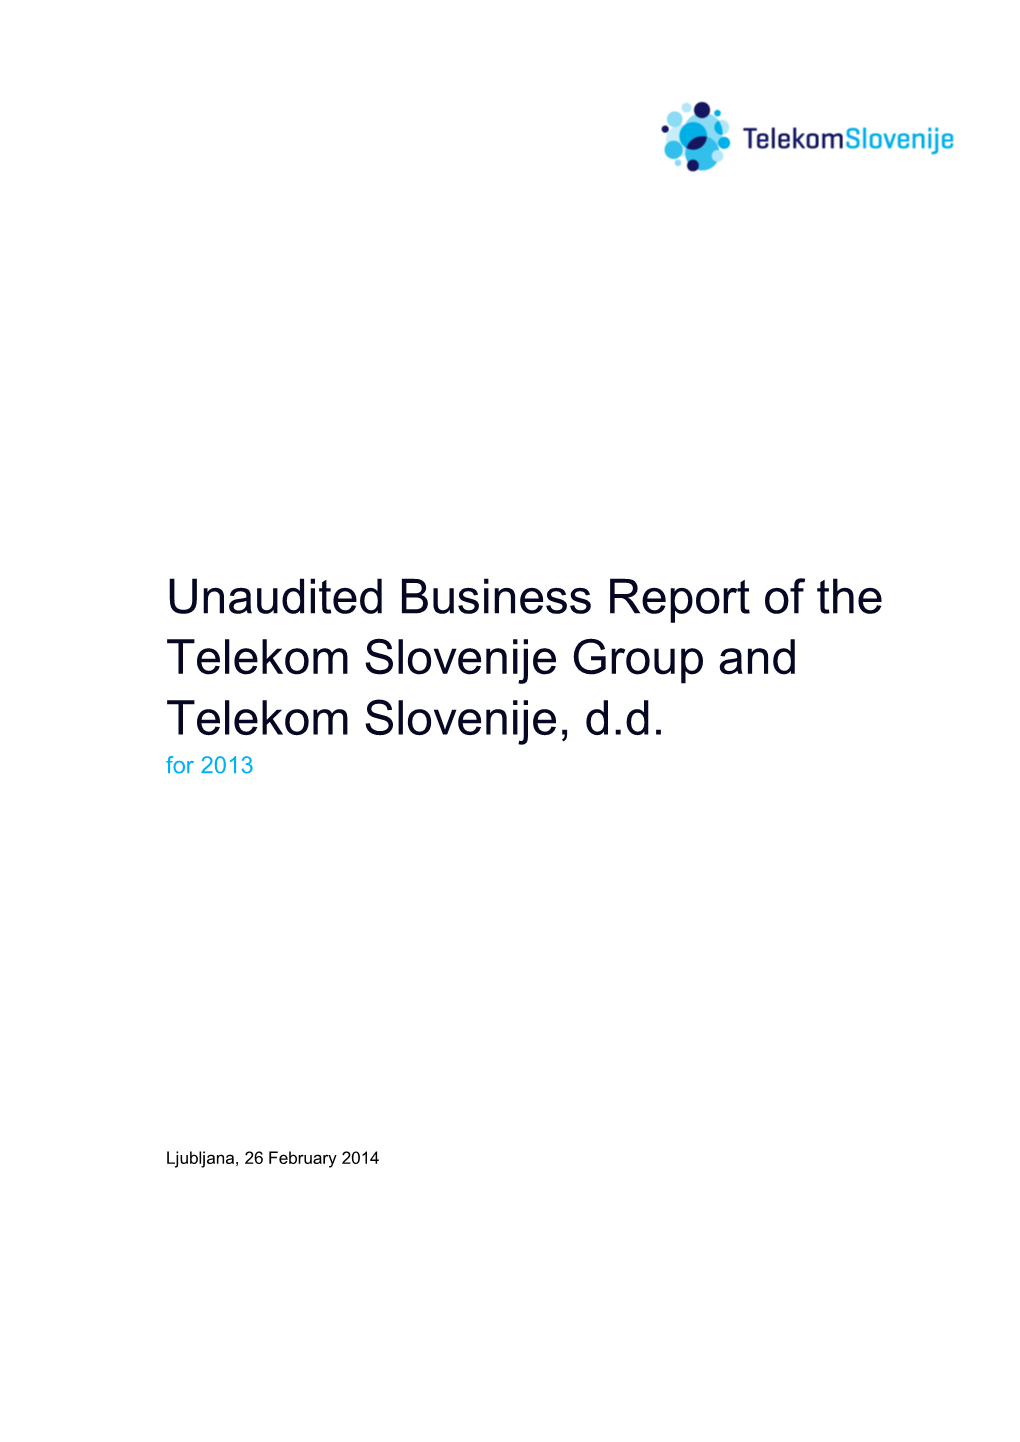 Unaudited Business Report of the Telekom Slovenije Group and Telekom Slovenije, D.D. for 2013